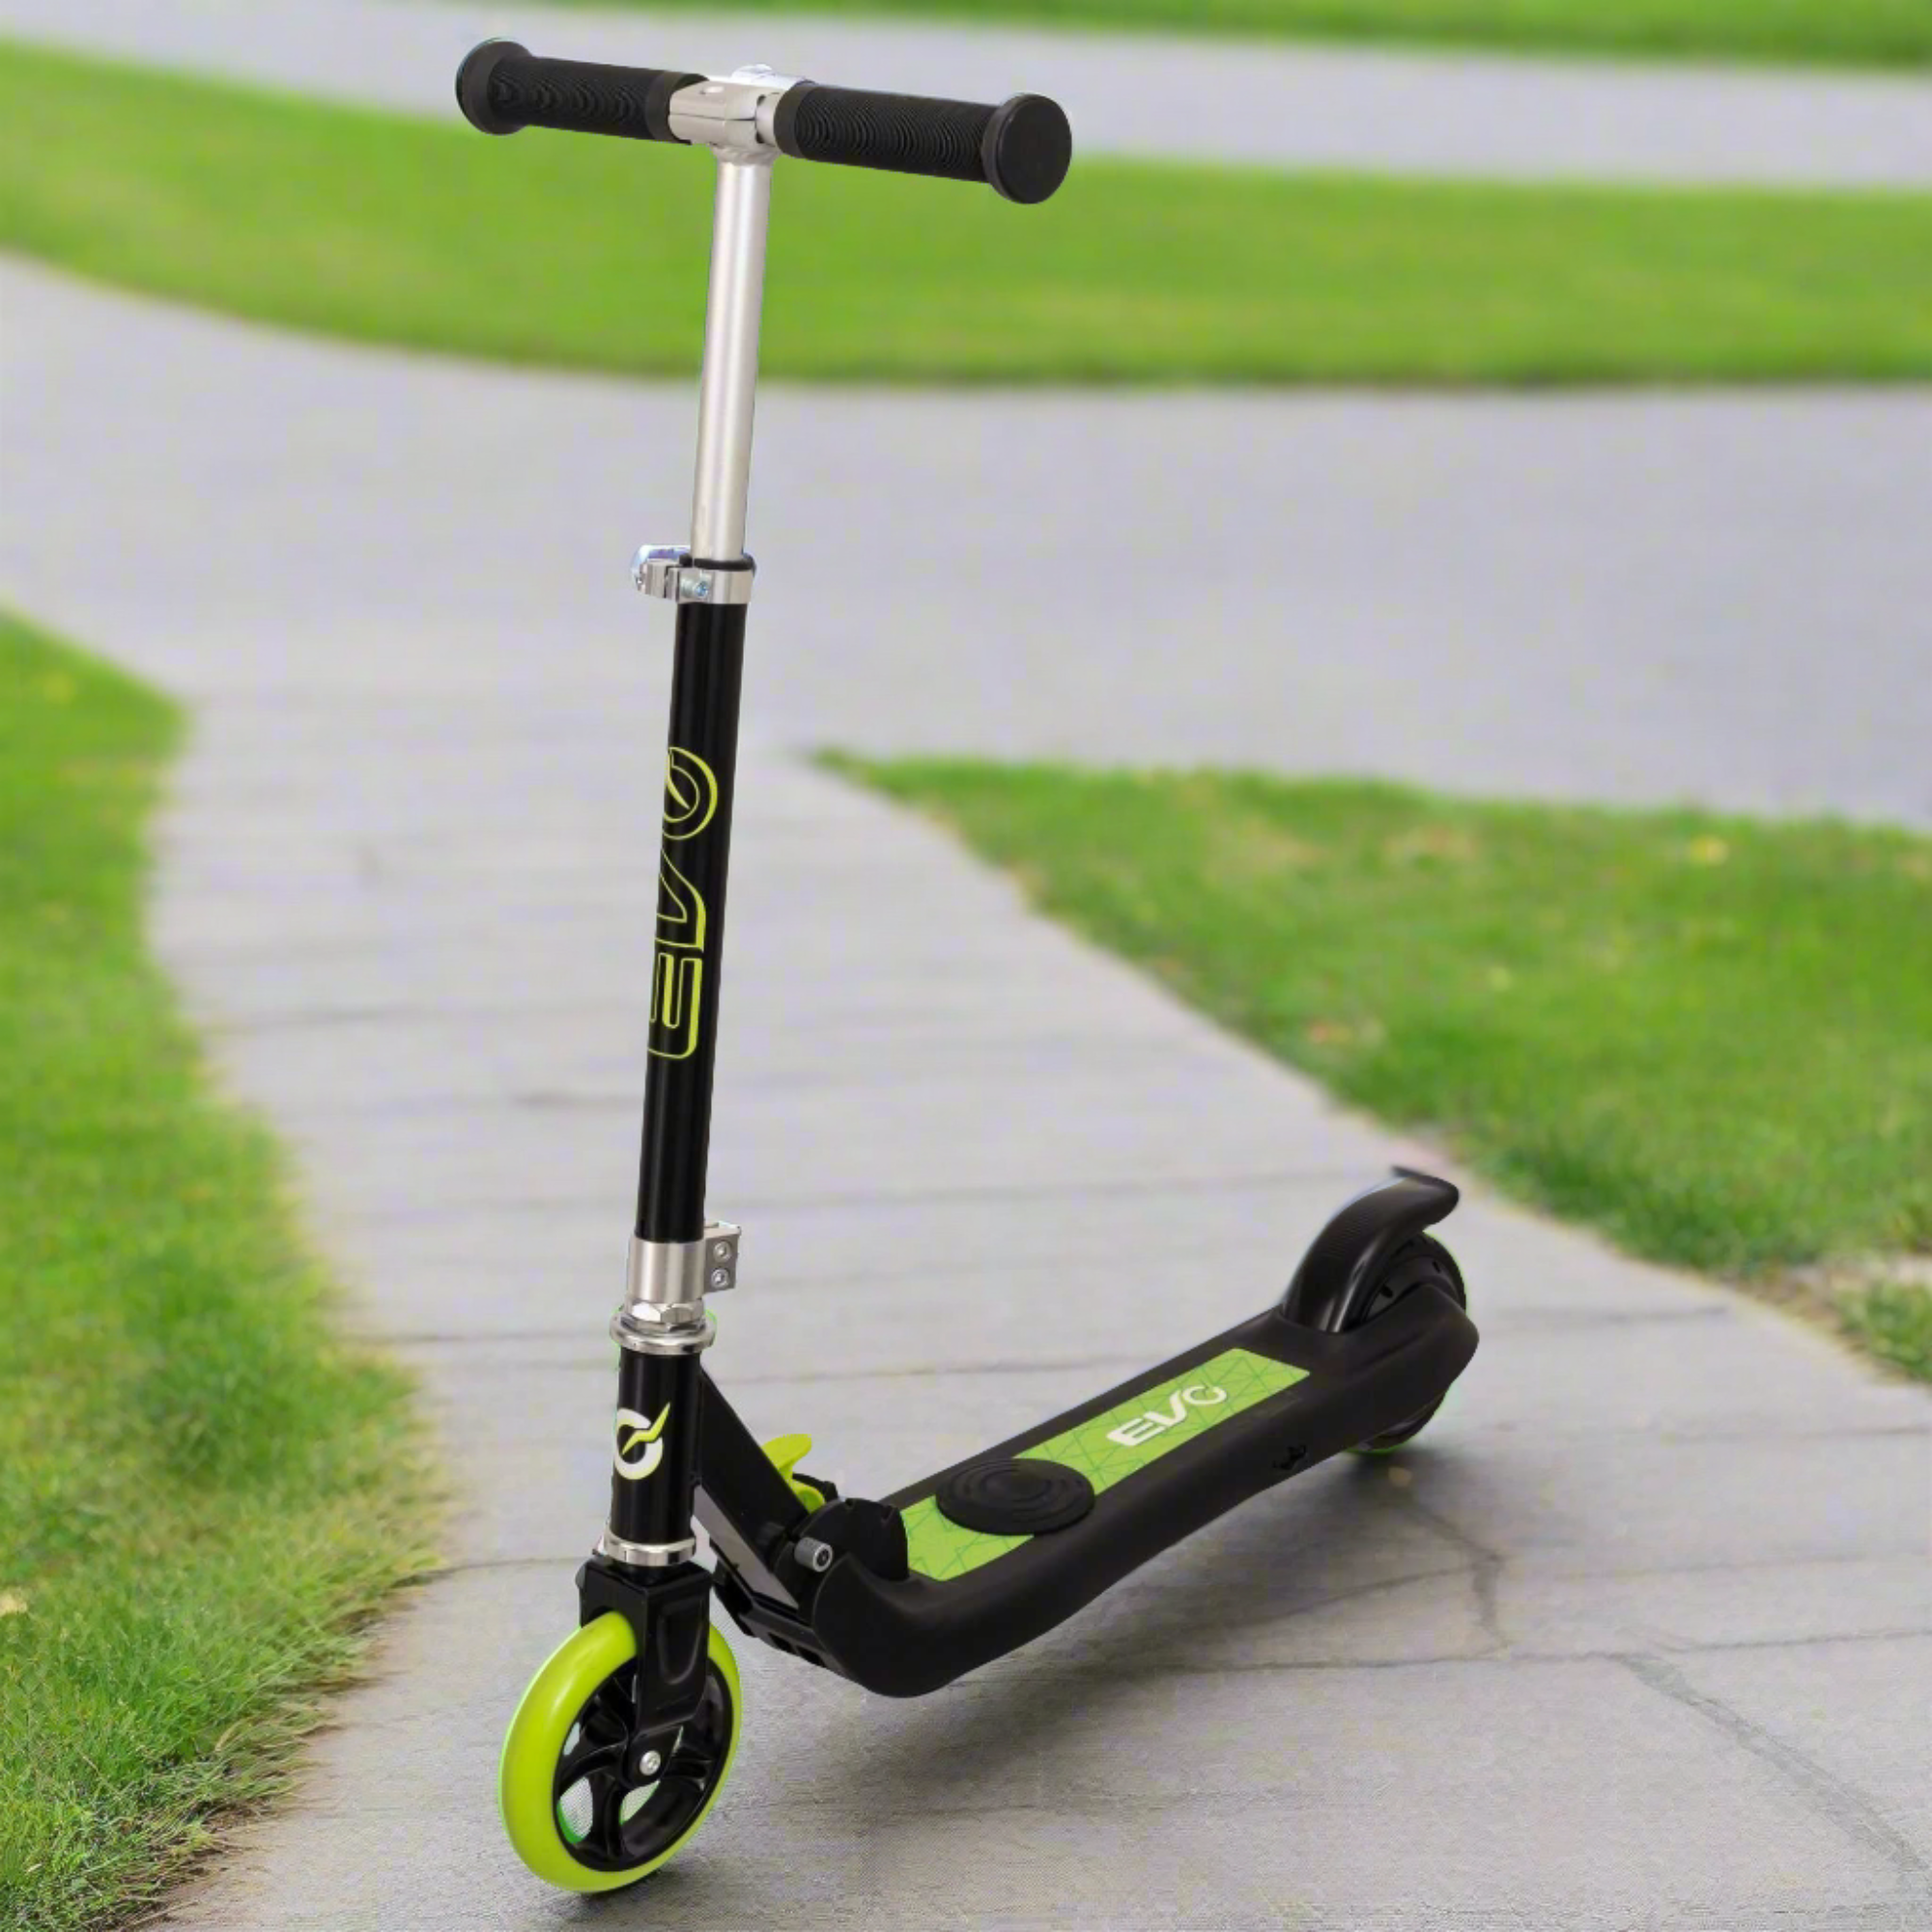 EVO VT1 Lithium Scooter for Kids Ages 6 and Up with Lightweight Design and Long-lasting Battery, prefect for outdoor and active play.